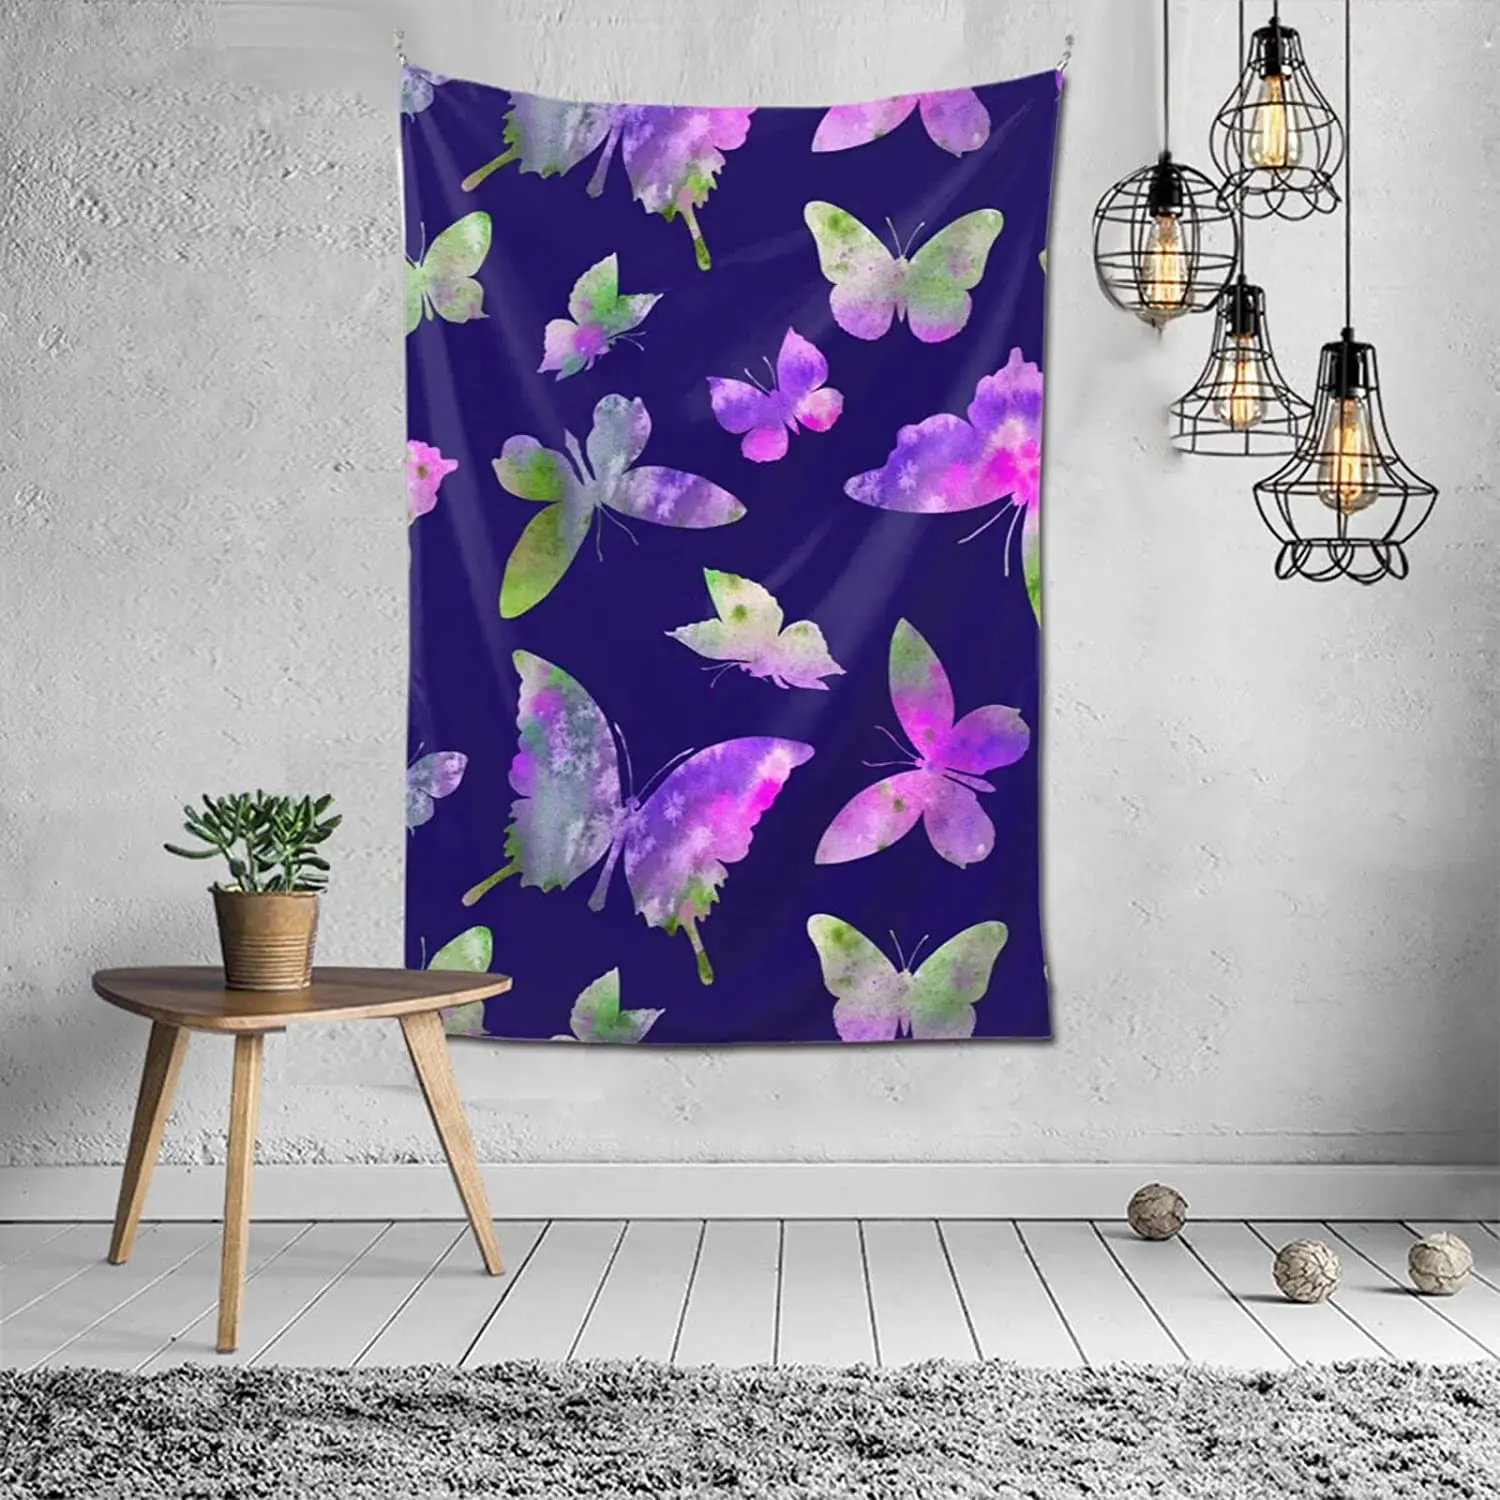 

Watercolor Butterflies Tapestry 60x40 Inch Wall Hanging Tapestries Wall Art For Home Living Room Dorm Party Decoration